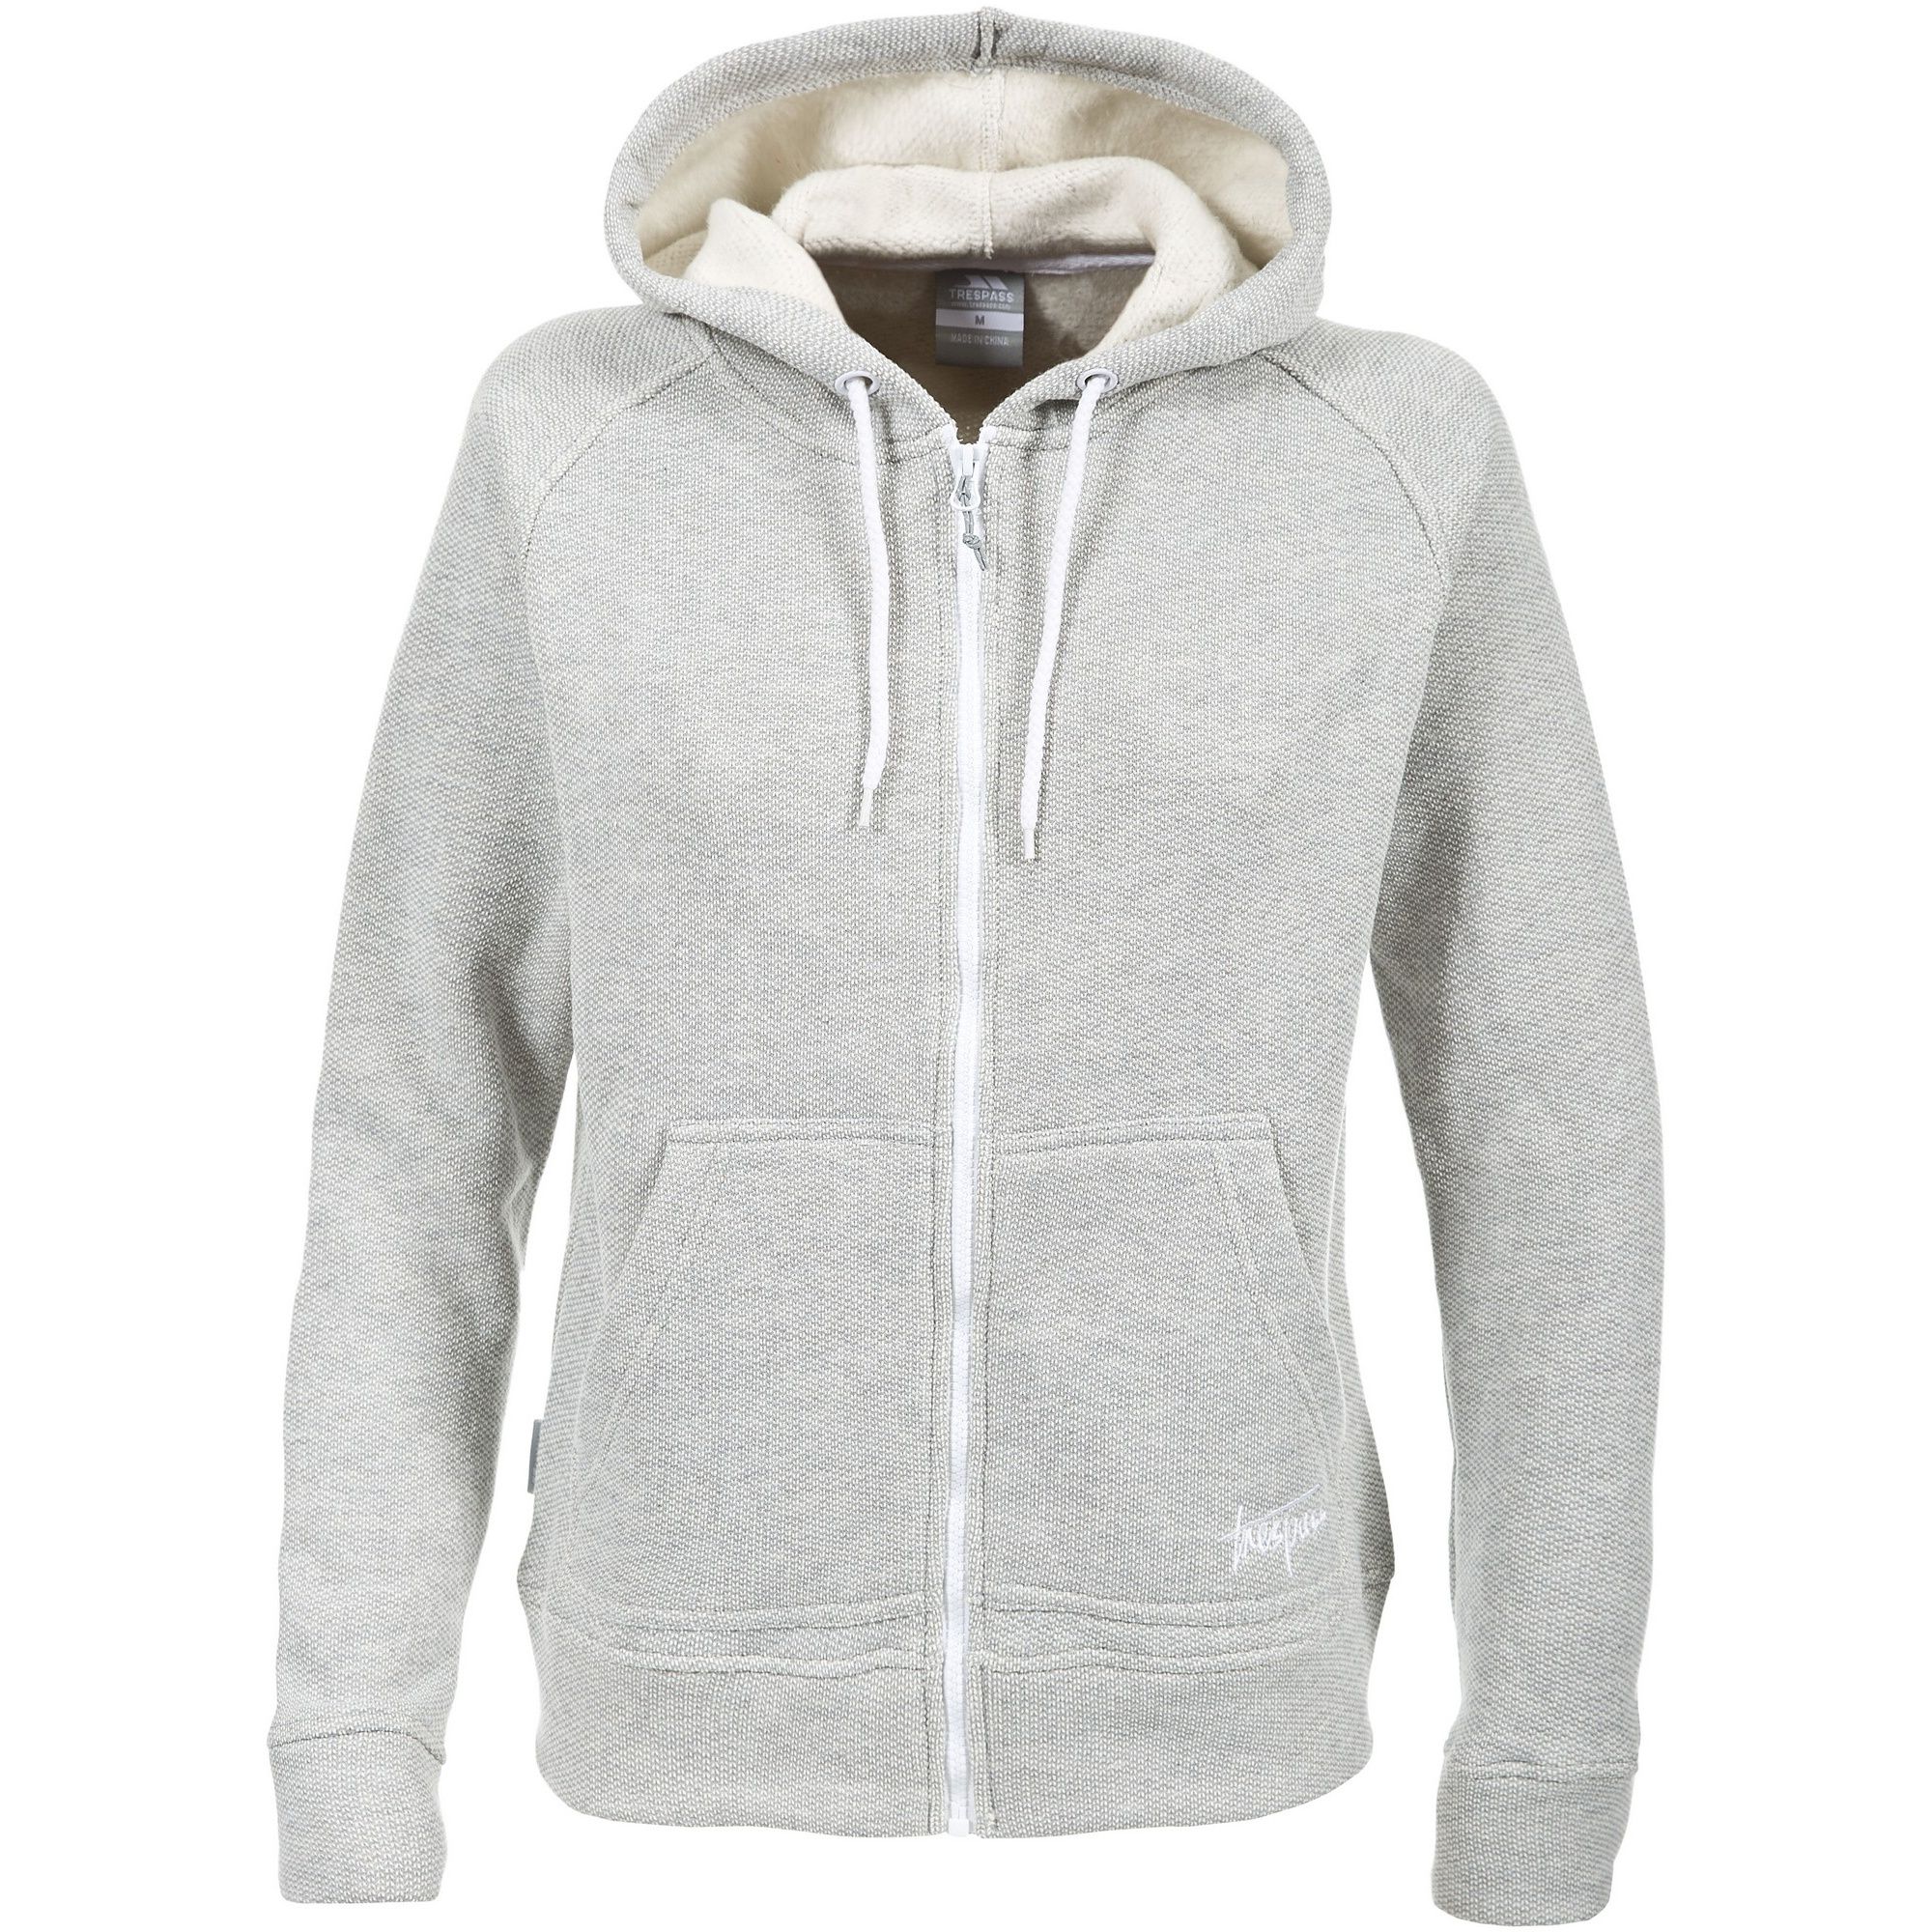 Womens fleece hoodie. Full zip. Adjustable grown on hood. Front pouch pockets. Embroidered logo. Long sleeves. 320gsm. Fabric: 66% Cotton/34% Polyester. Trespass Womens Chest Sizing (approx): XS/8 - 32in/81cm, S/10 - 34in/86cm, M/12 - 36in/91.4cm, L/14 - 38in/96.5cm, XL/16 - 40in/101.5cm, XXL/18 - 42in/106.5cm.